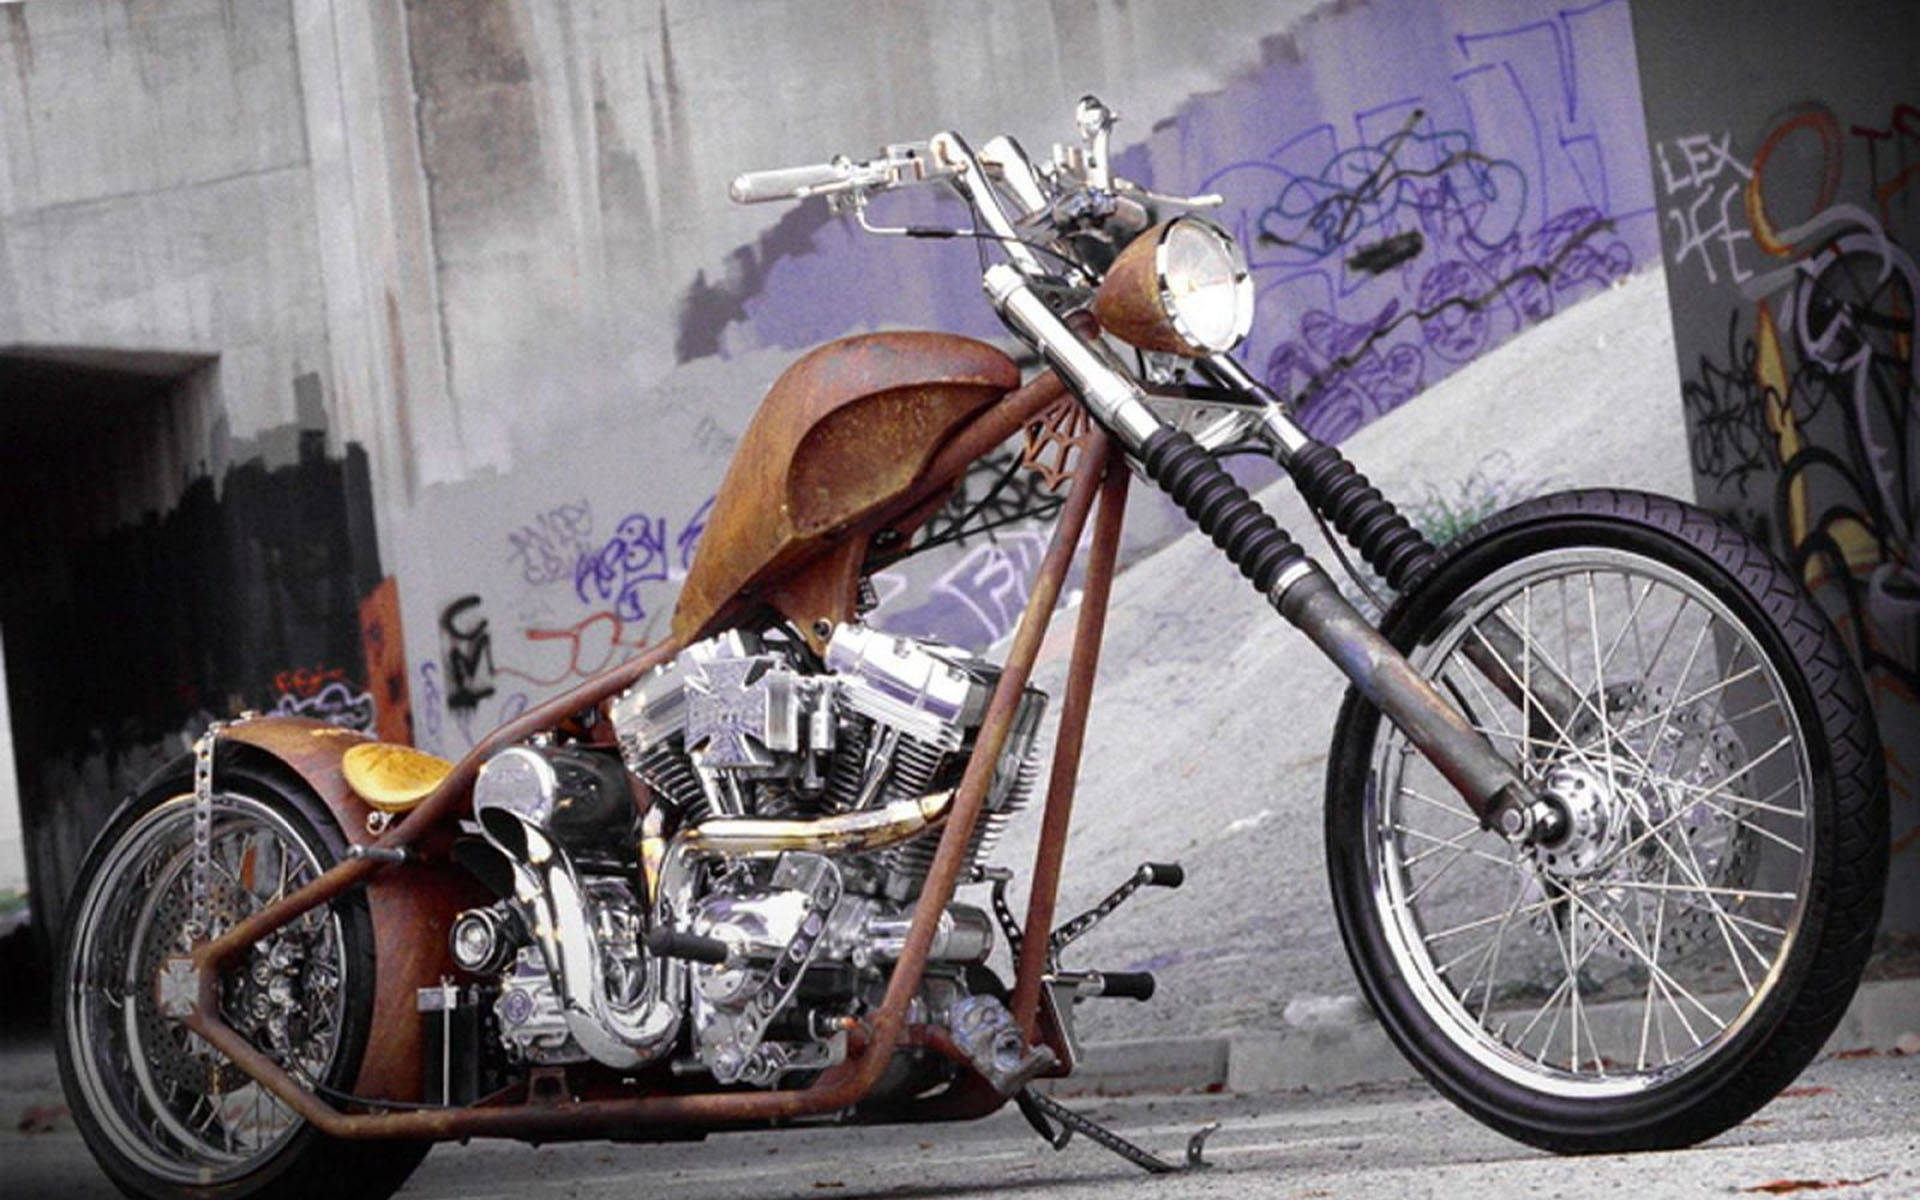 West Coast Choppers Rustic Motorcycle